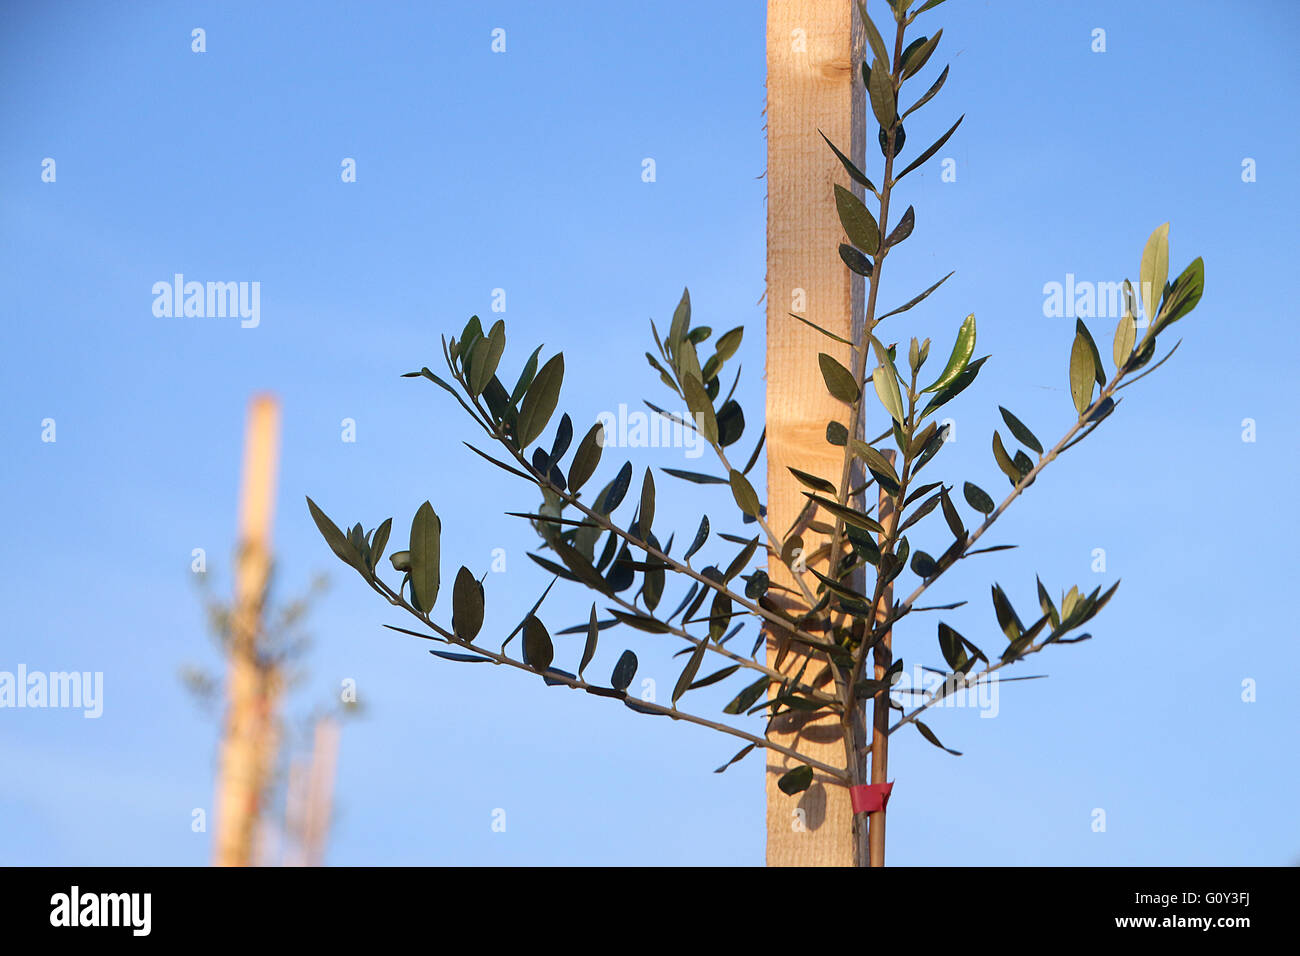 Close-up of young olive tree growing against wooden stake in orchard Stock Photo